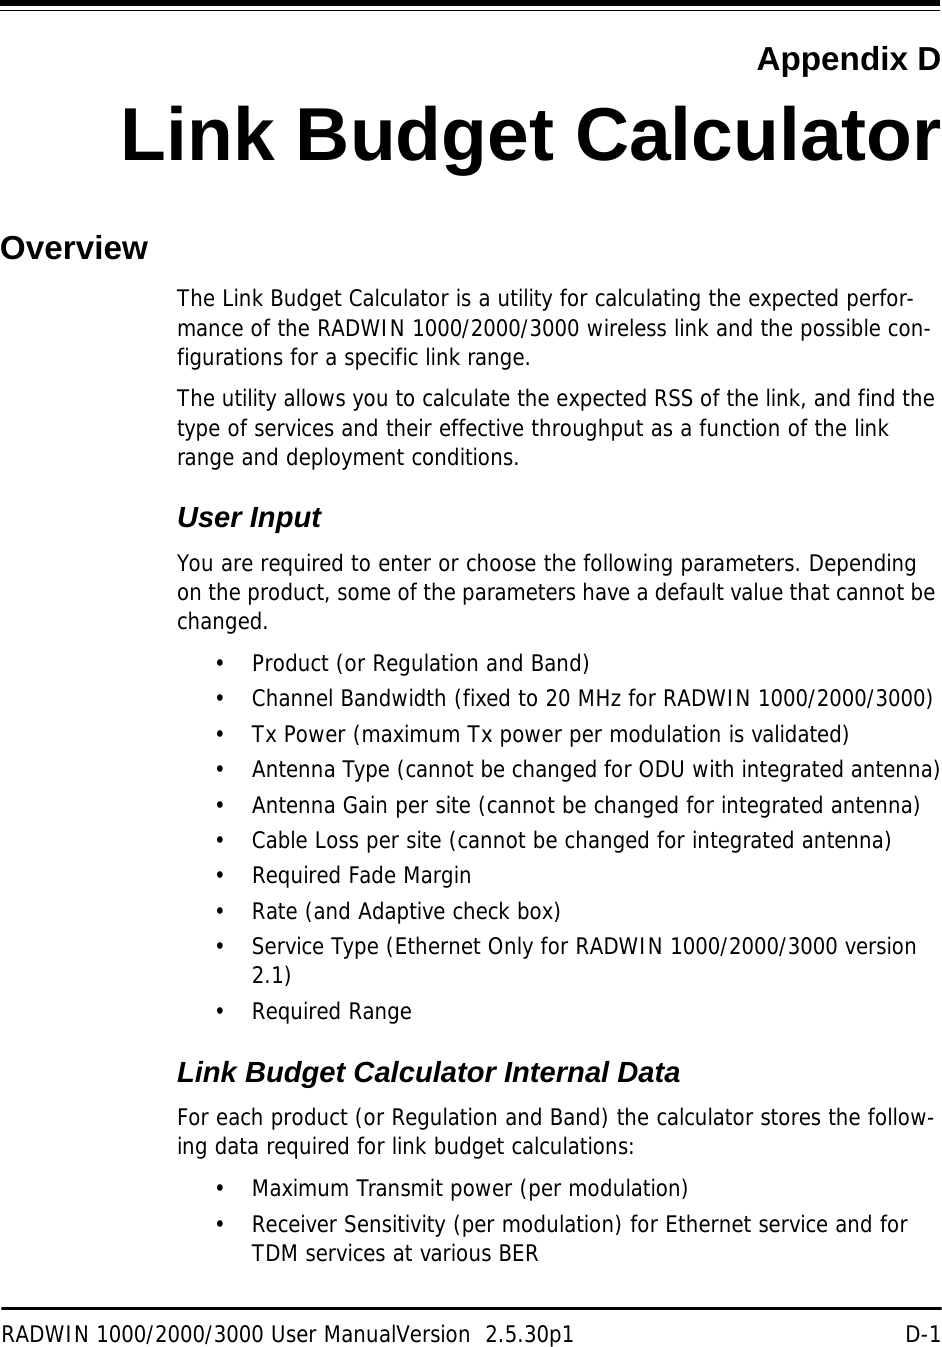 RADWIN 1000/2000/3000 User ManualVersion  2.5.30p1 D-1Appendix DLink Budget CalculatorOverviewThe Link Budget Calculator is a utility for calculating the expected perfor-mance of the RADWIN 1000/2000/3000 wireless link and the possible con-figurations for a specific link range.The utility allows you to calculate the expected RSS of the link, and find the type of services and their effective throughput as a function of the link range and deployment conditions.User InputYou are required to enter or choose the following parameters. Depending on the product, some of the parameters have a default value that cannot be changed. • Product (or Regulation and Band)• Channel Bandwidth (fixed to 20 MHz for RADWIN 1000/2000/3000)• Tx Power (maximum Tx power per modulation is validated)• Antenna Type (cannot be changed for ODU with integrated antenna)• Antenna Gain per site (cannot be changed for integrated antenna)• Cable Loss per site (cannot be changed for integrated antenna)• Required Fade Margin• Rate (and Adaptive check box)• Service Type (Ethernet Only for RADWIN 1000/2000/3000 version 2.1)• Required RangeLink Budget Calculator Internal DataFor each product (or Regulation and Band) the calculator stores the follow-ing data required for link budget calculations:• Maximum Transmit power (per modulation)• Receiver Sensitivity (per modulation) for Ethernet service and for TDM services at various BER